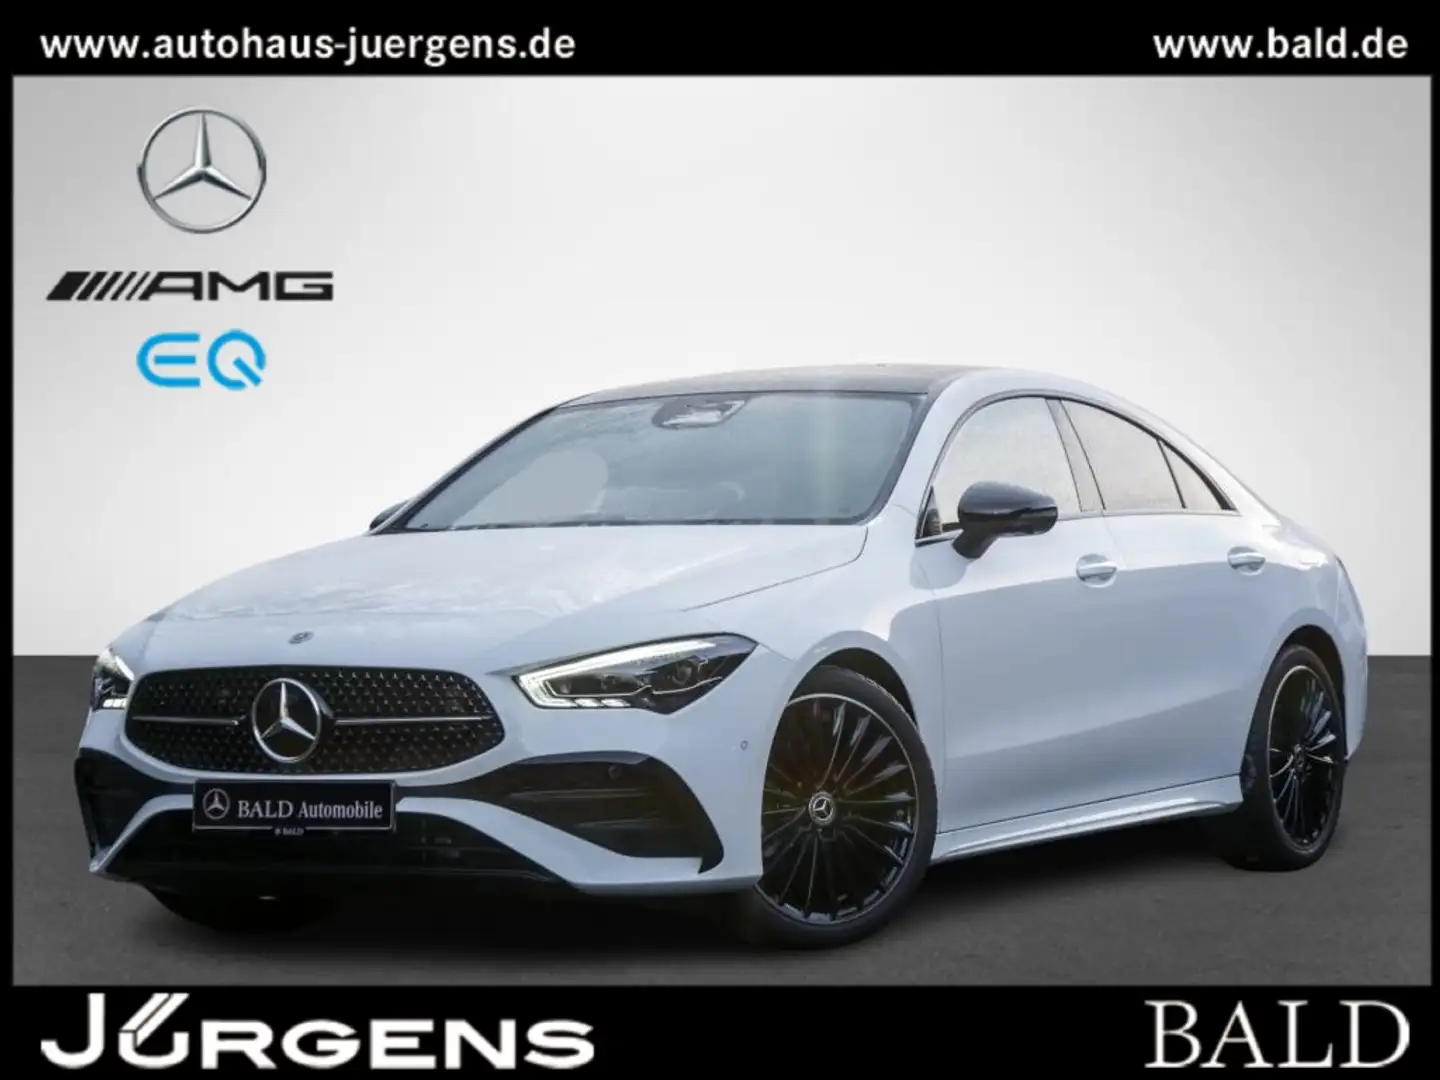 Mercedes-Benz CLA 180 AMG/Wide/ILS/Pano/360/HUD/Memo/Night/19" Wit - 1